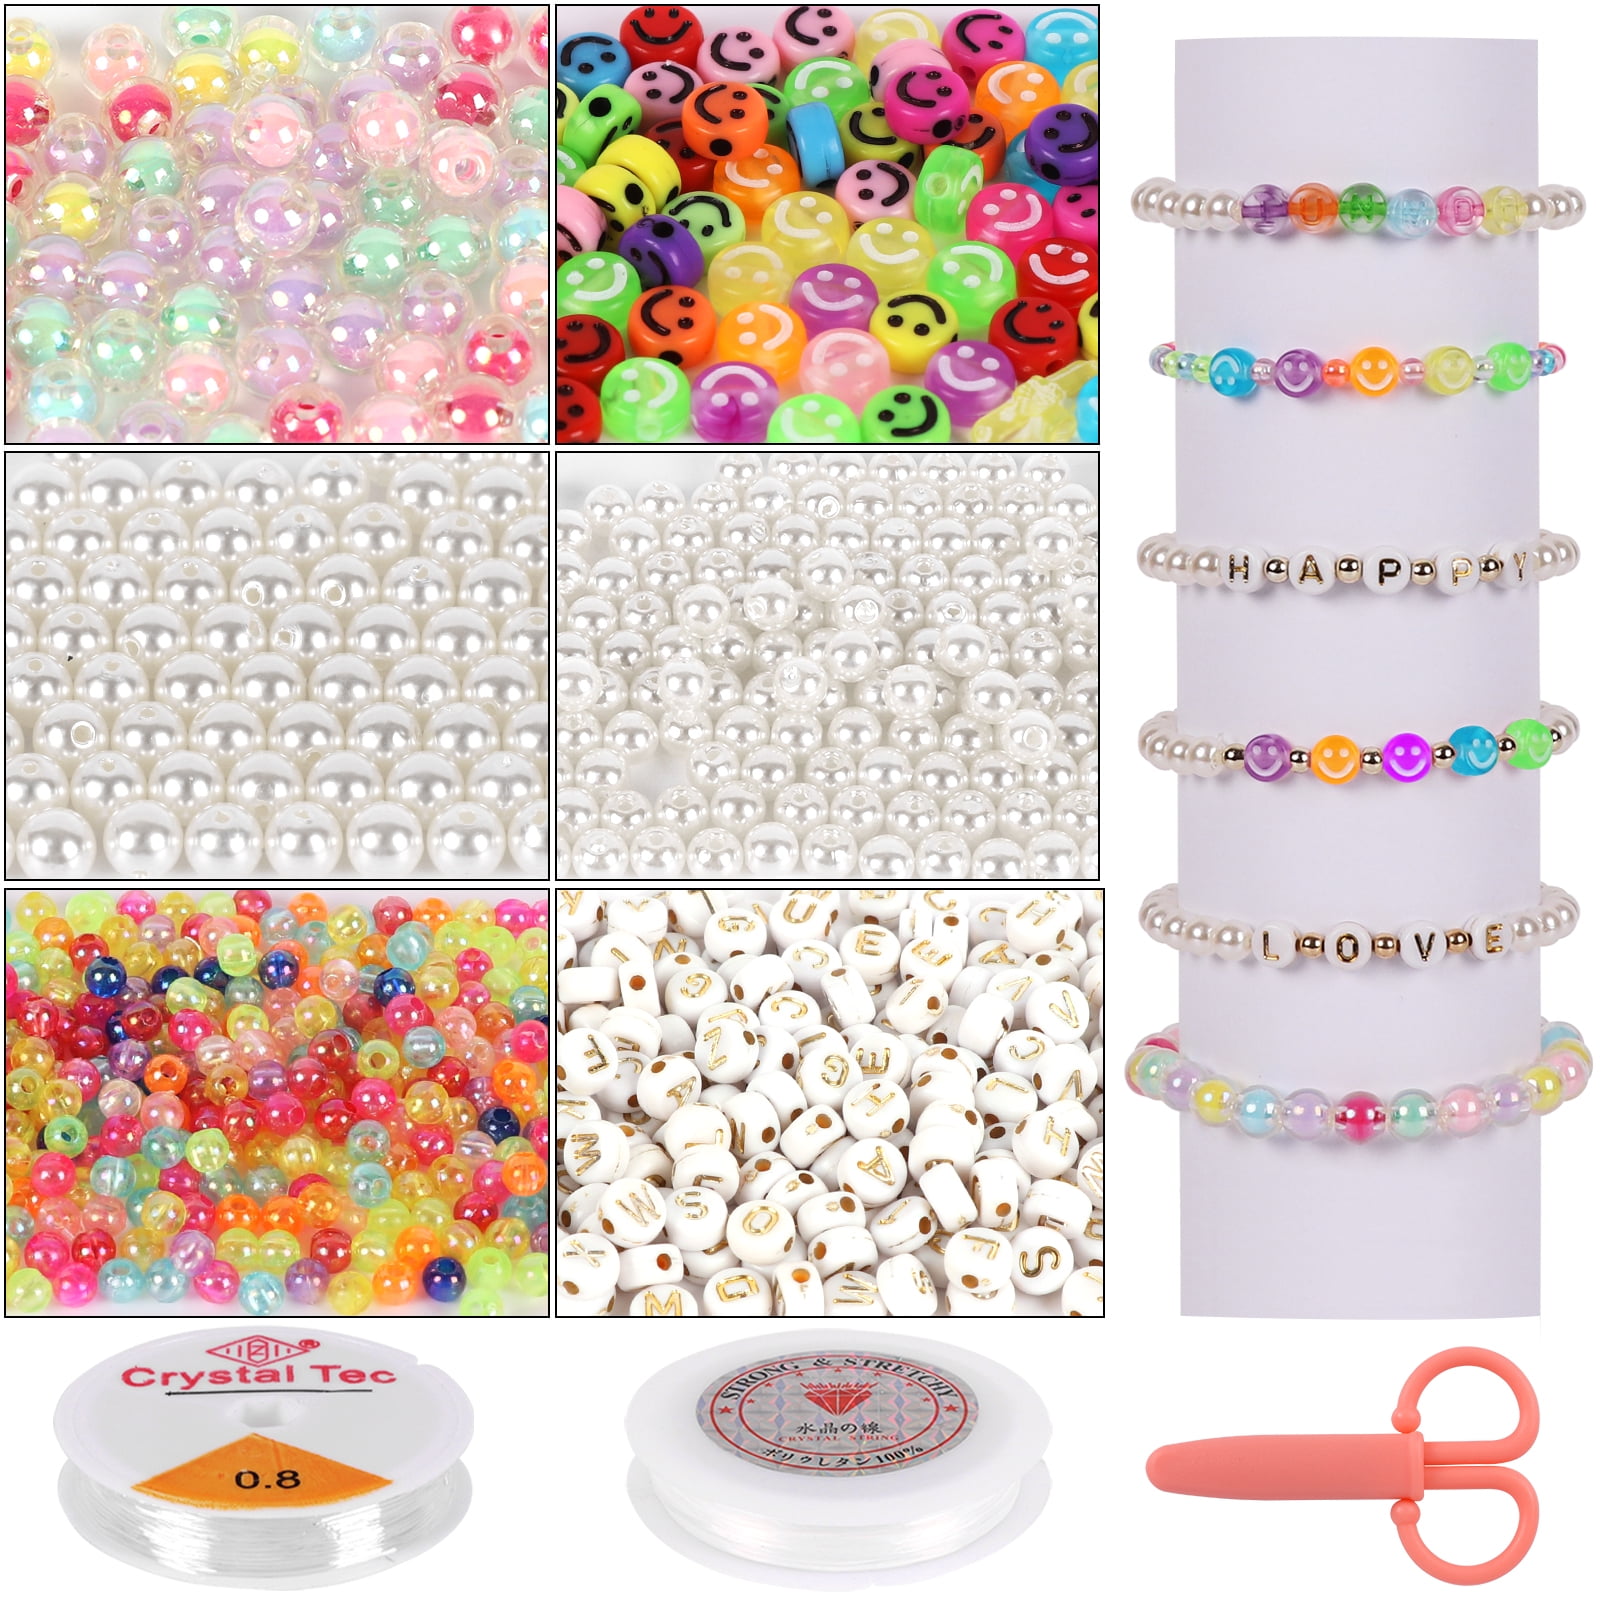 500PCS Acrylic Small Letter Beads Crystal Color for Jewelry Making Alphabet  Beads for Bracelets Kit Letters Beads for Necklace Making